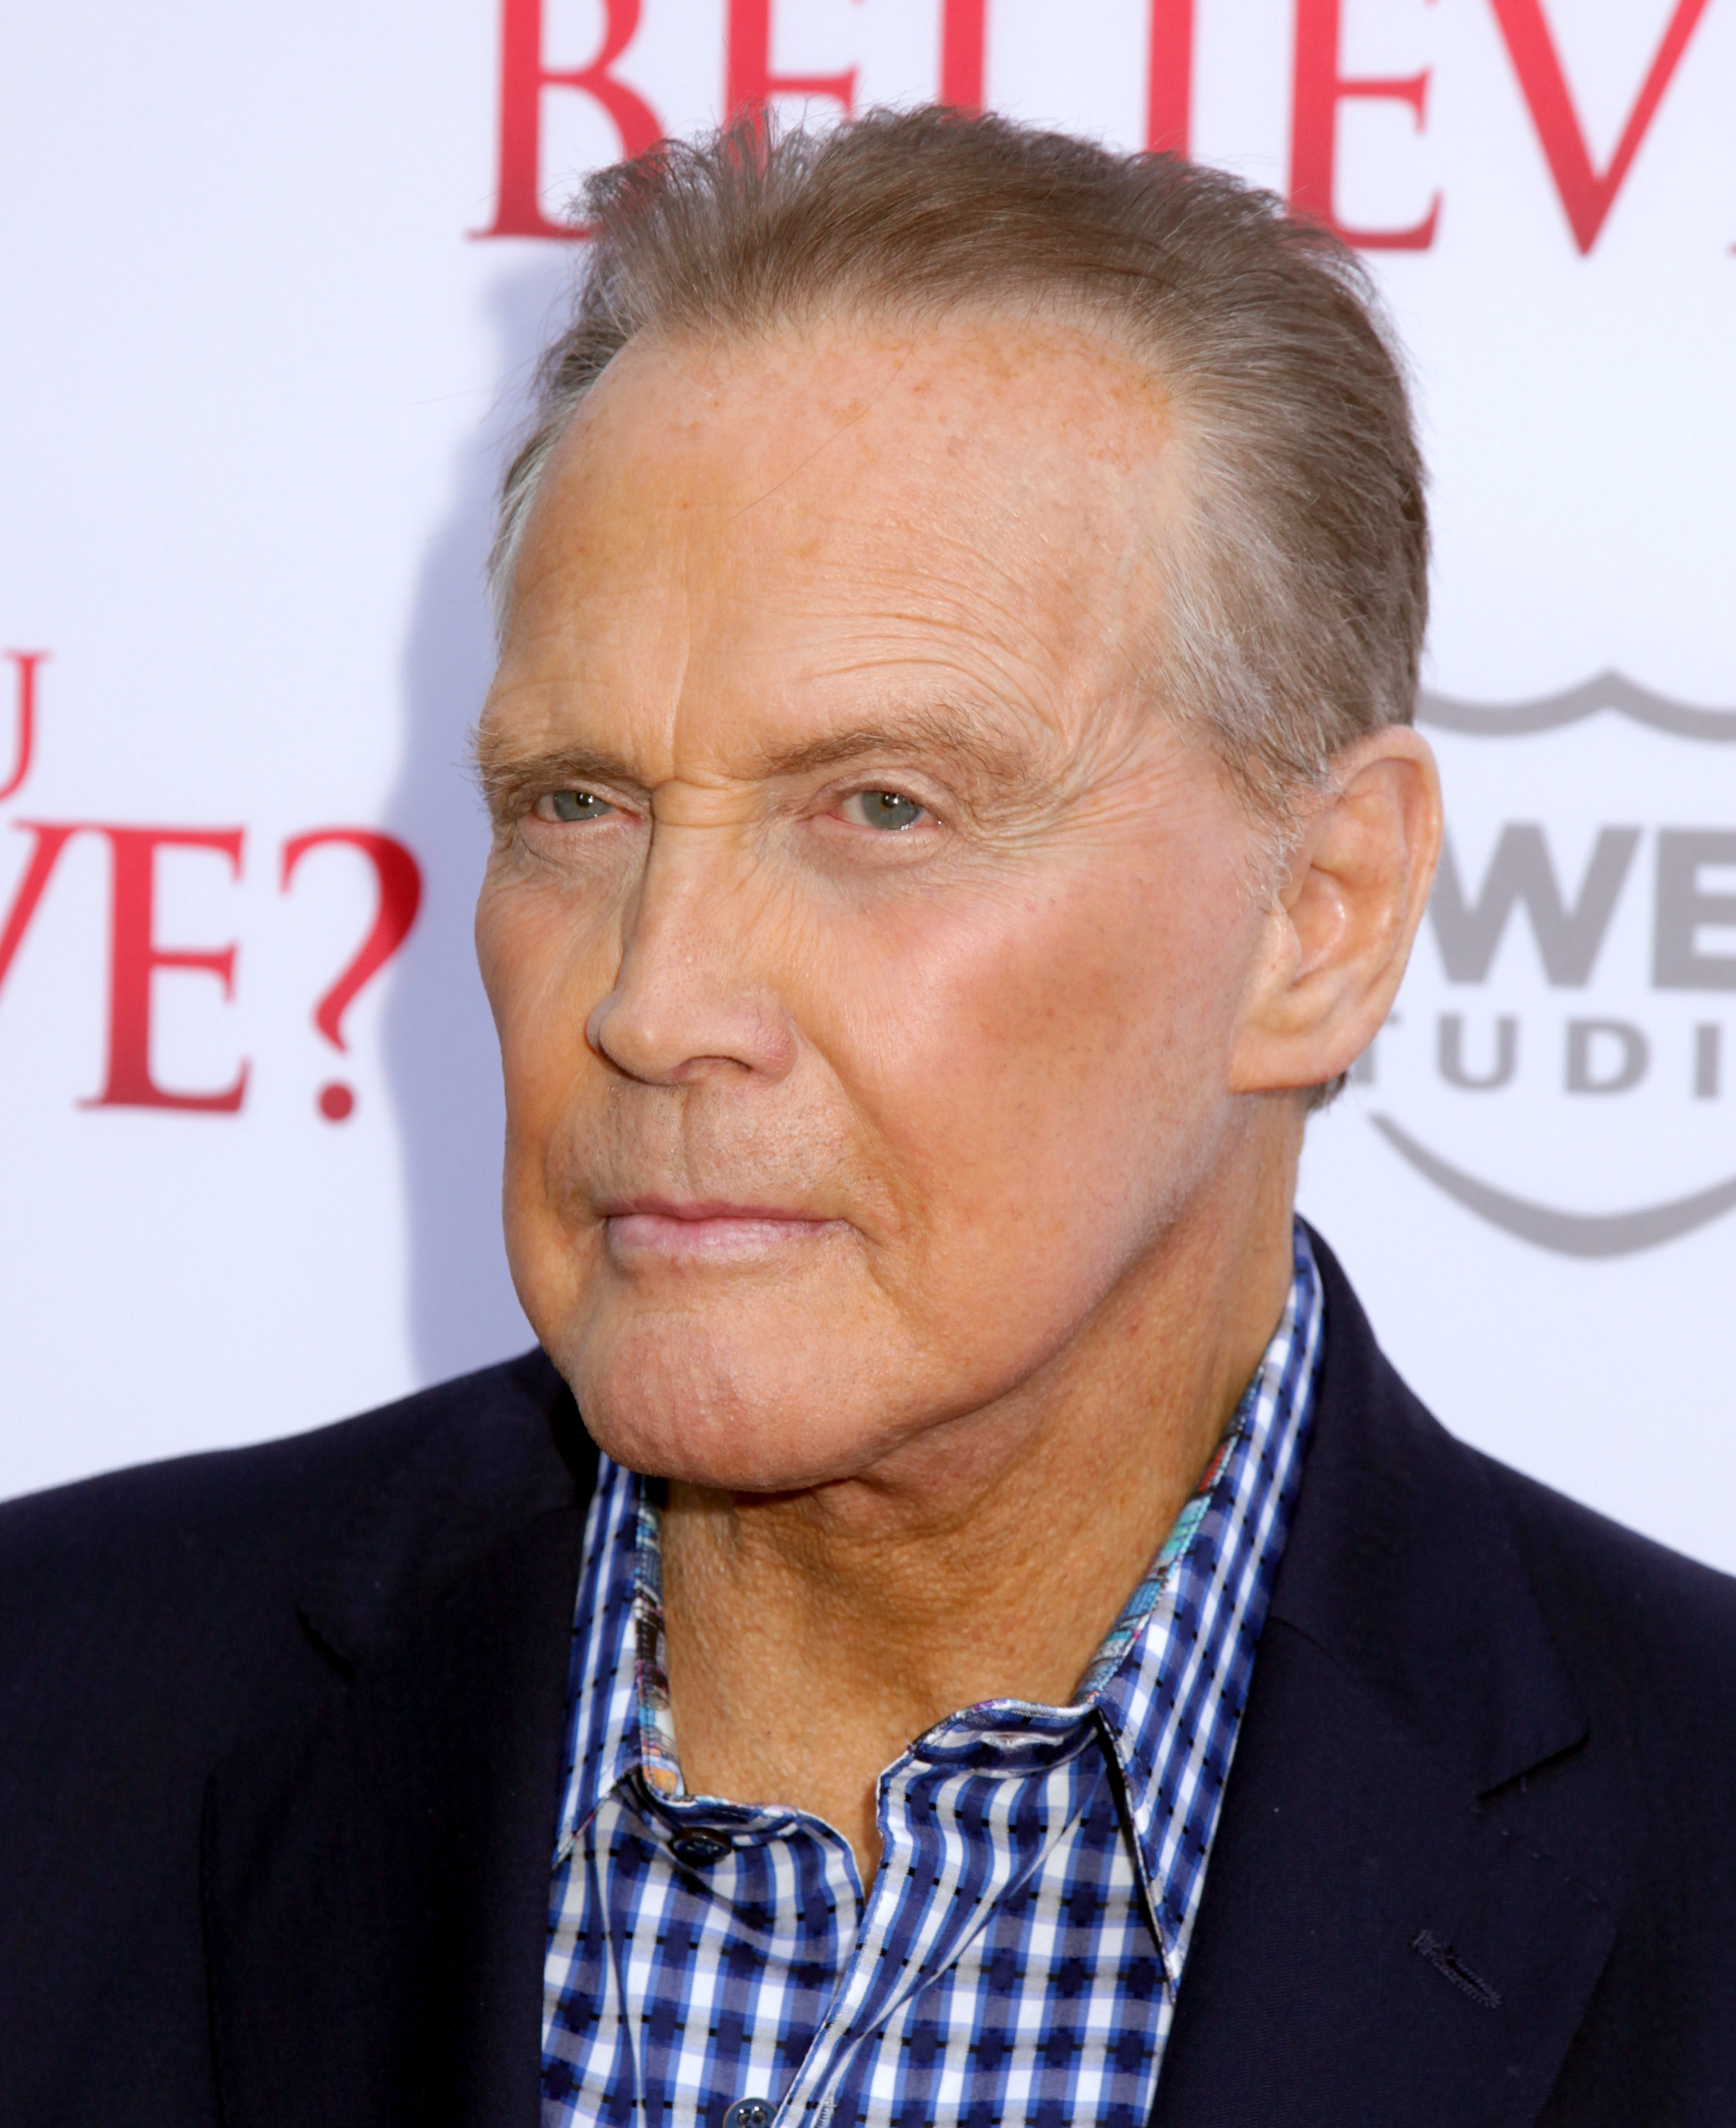 Lee Majors at the L.A. Premiere of his film 